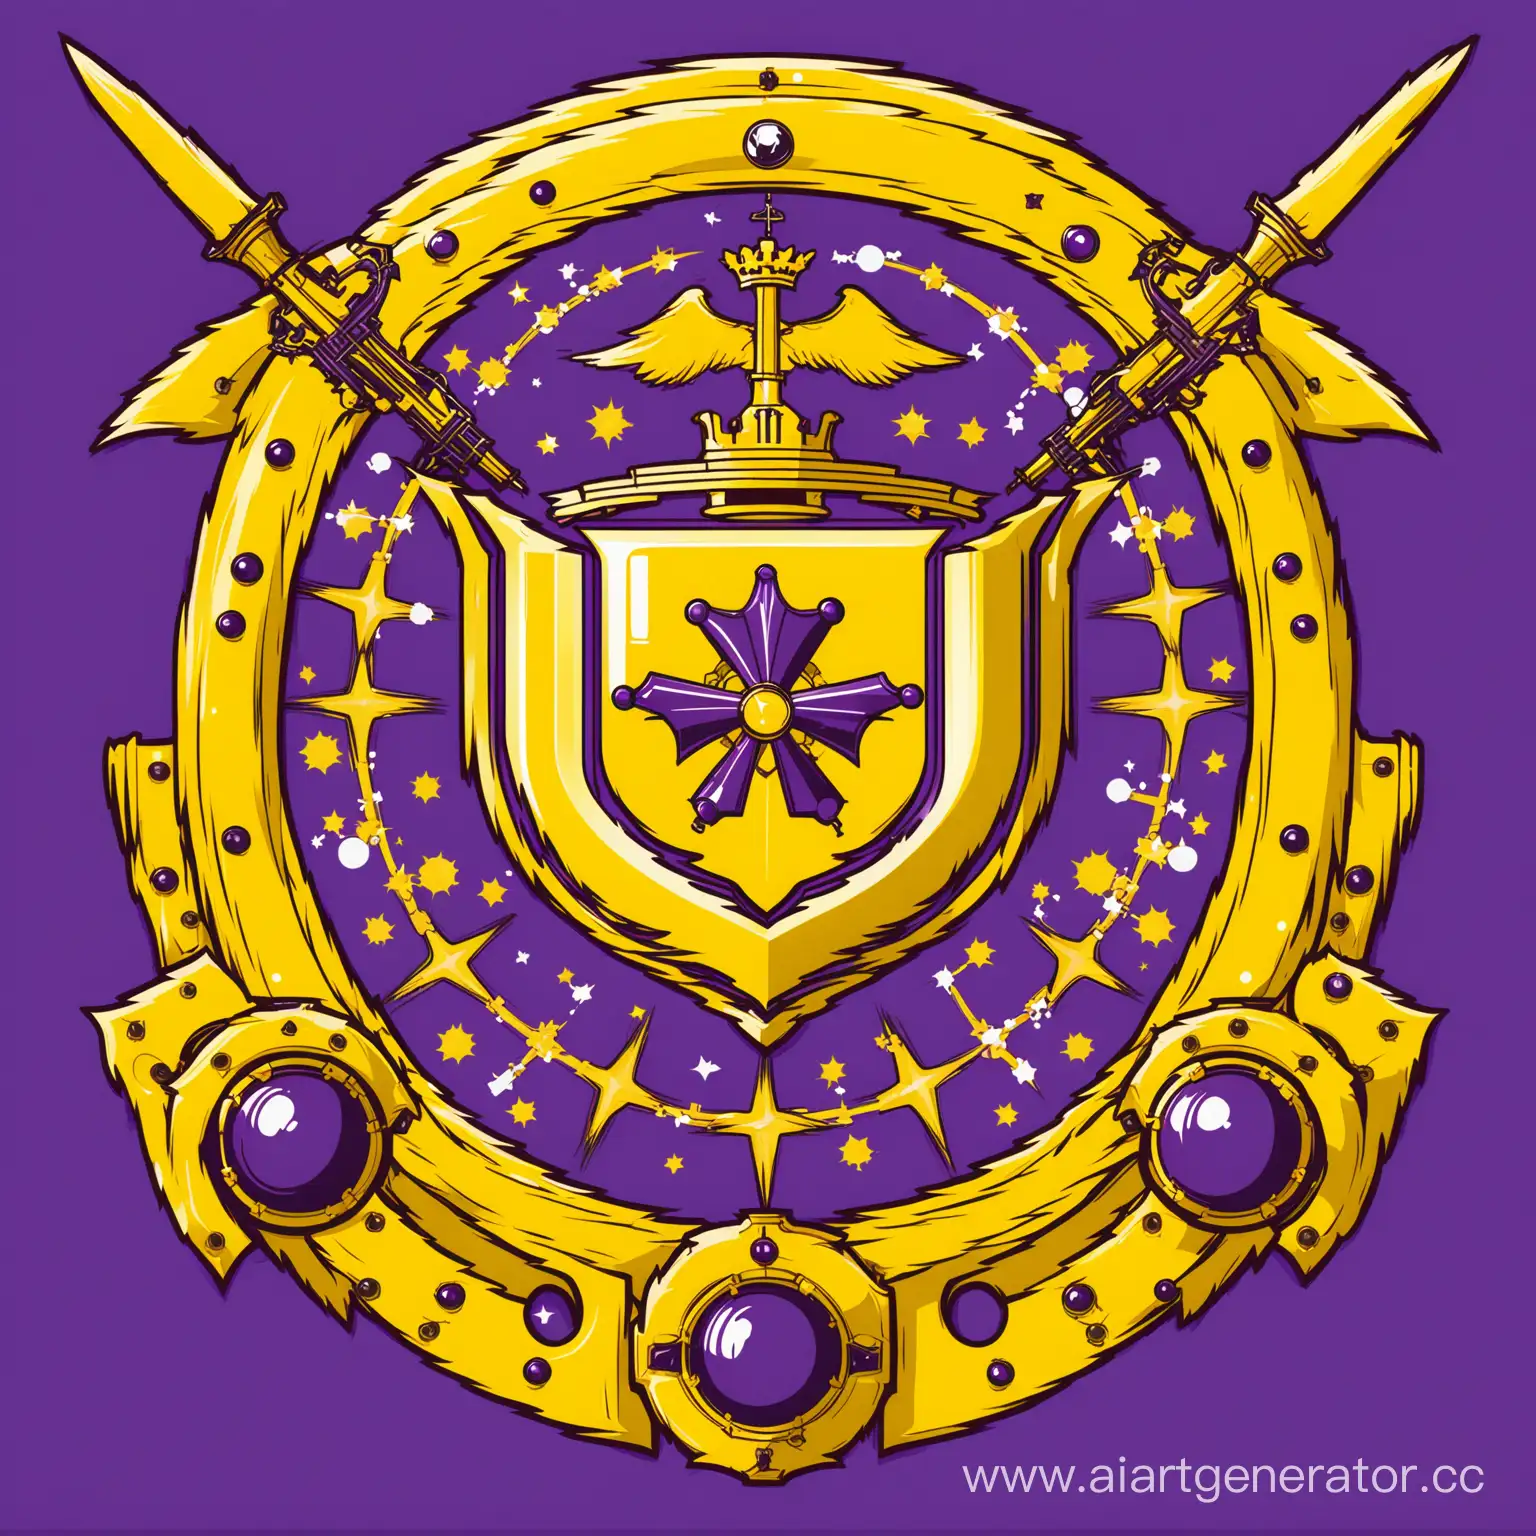 Empire-of-Epsilon-Coat-of-Arms-Mechanic-and-Chemistry-Symbol-in-Purple-and-Yellow